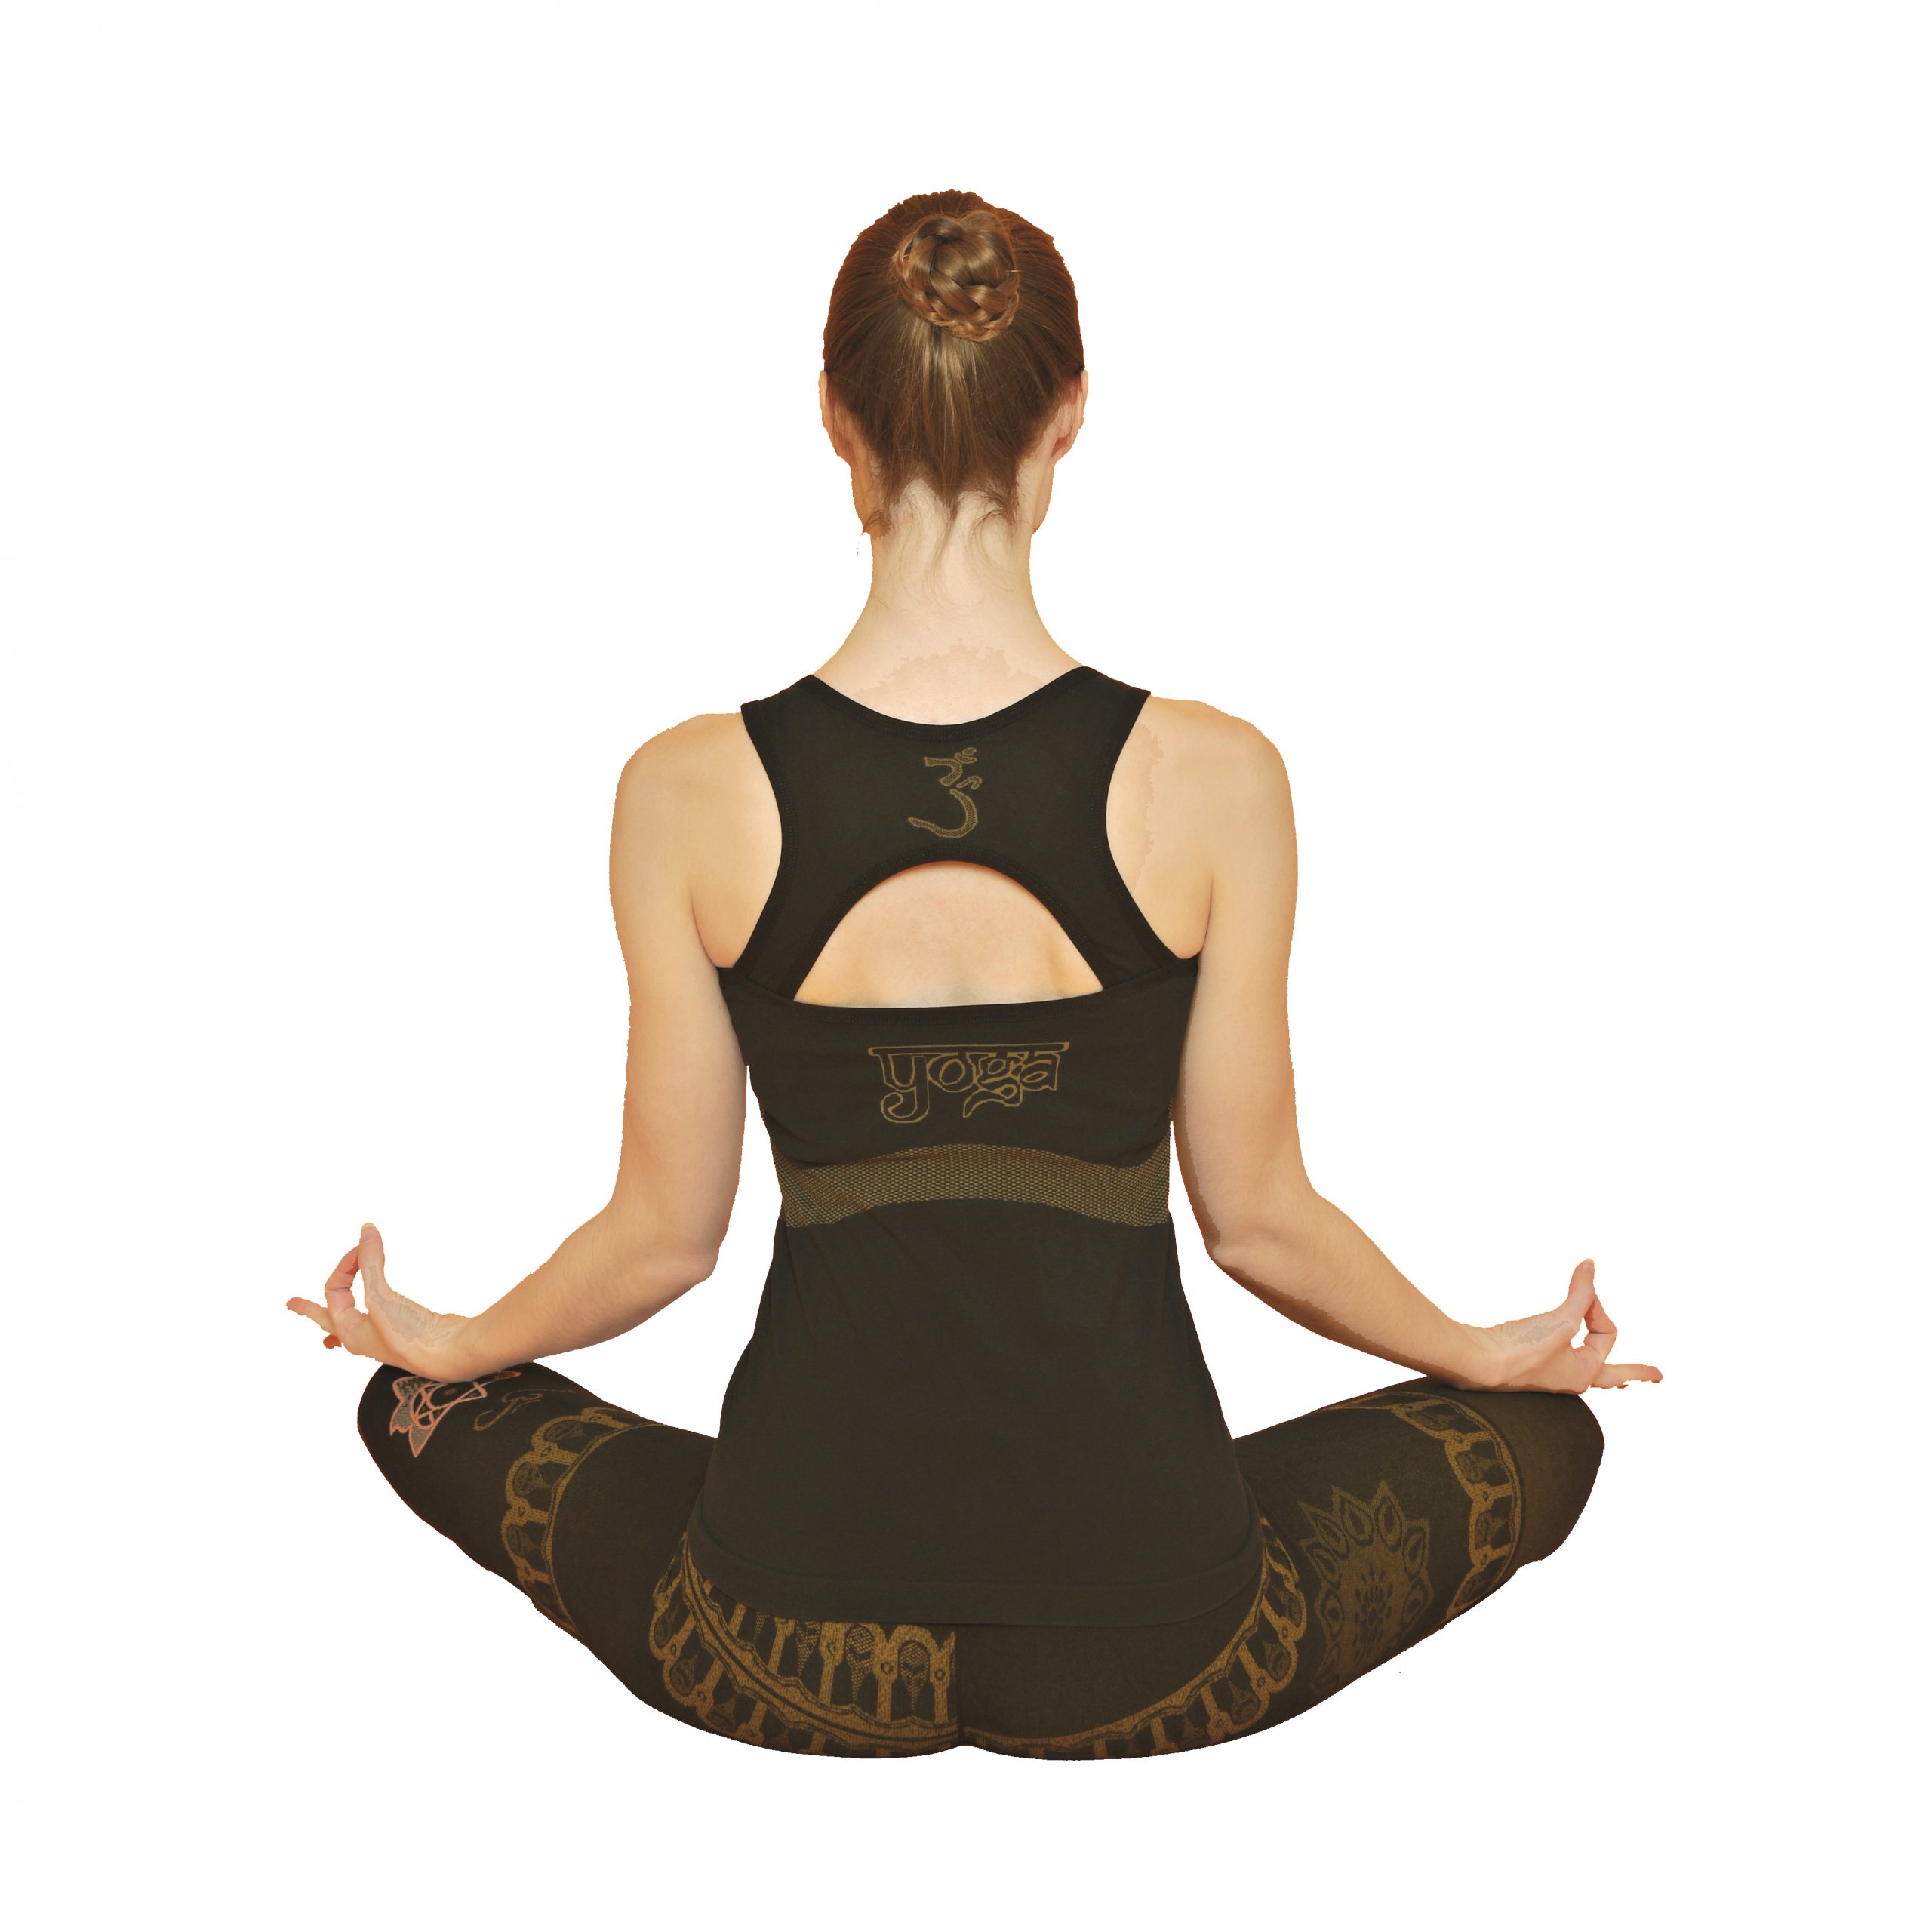 bhakti black yoga outfit shown from the back to show racer back of the vest with cutout detail